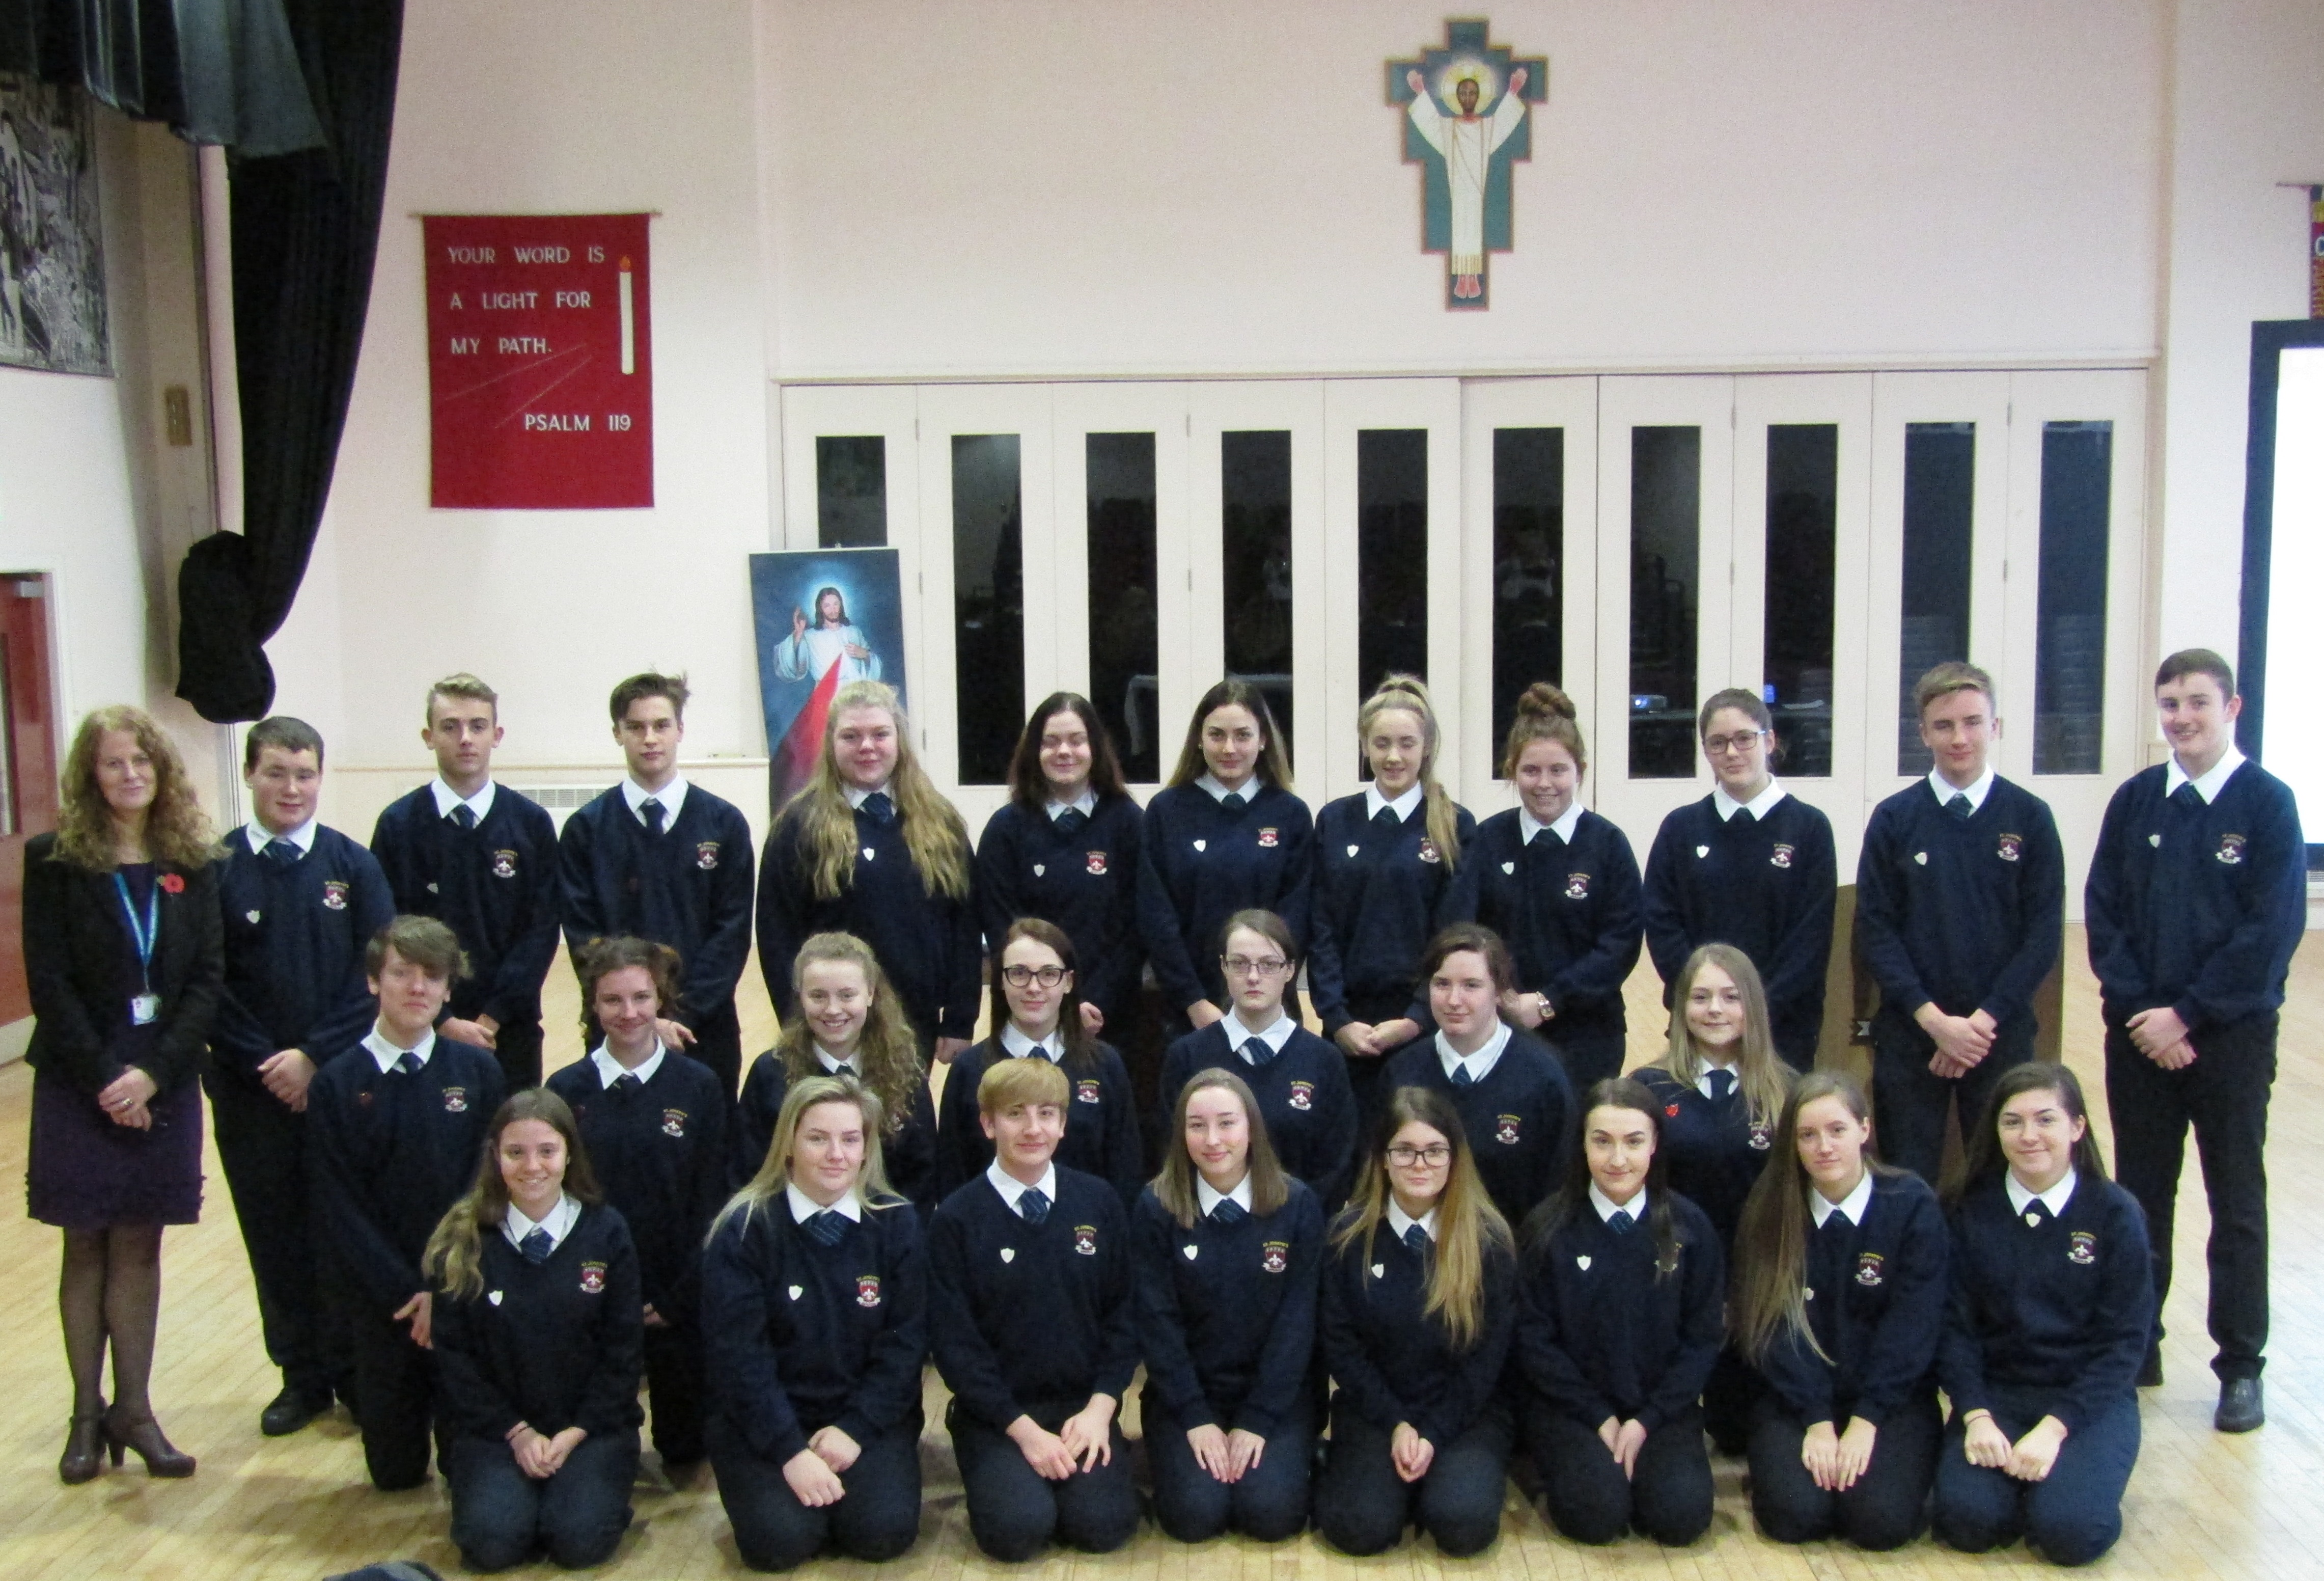 prefects